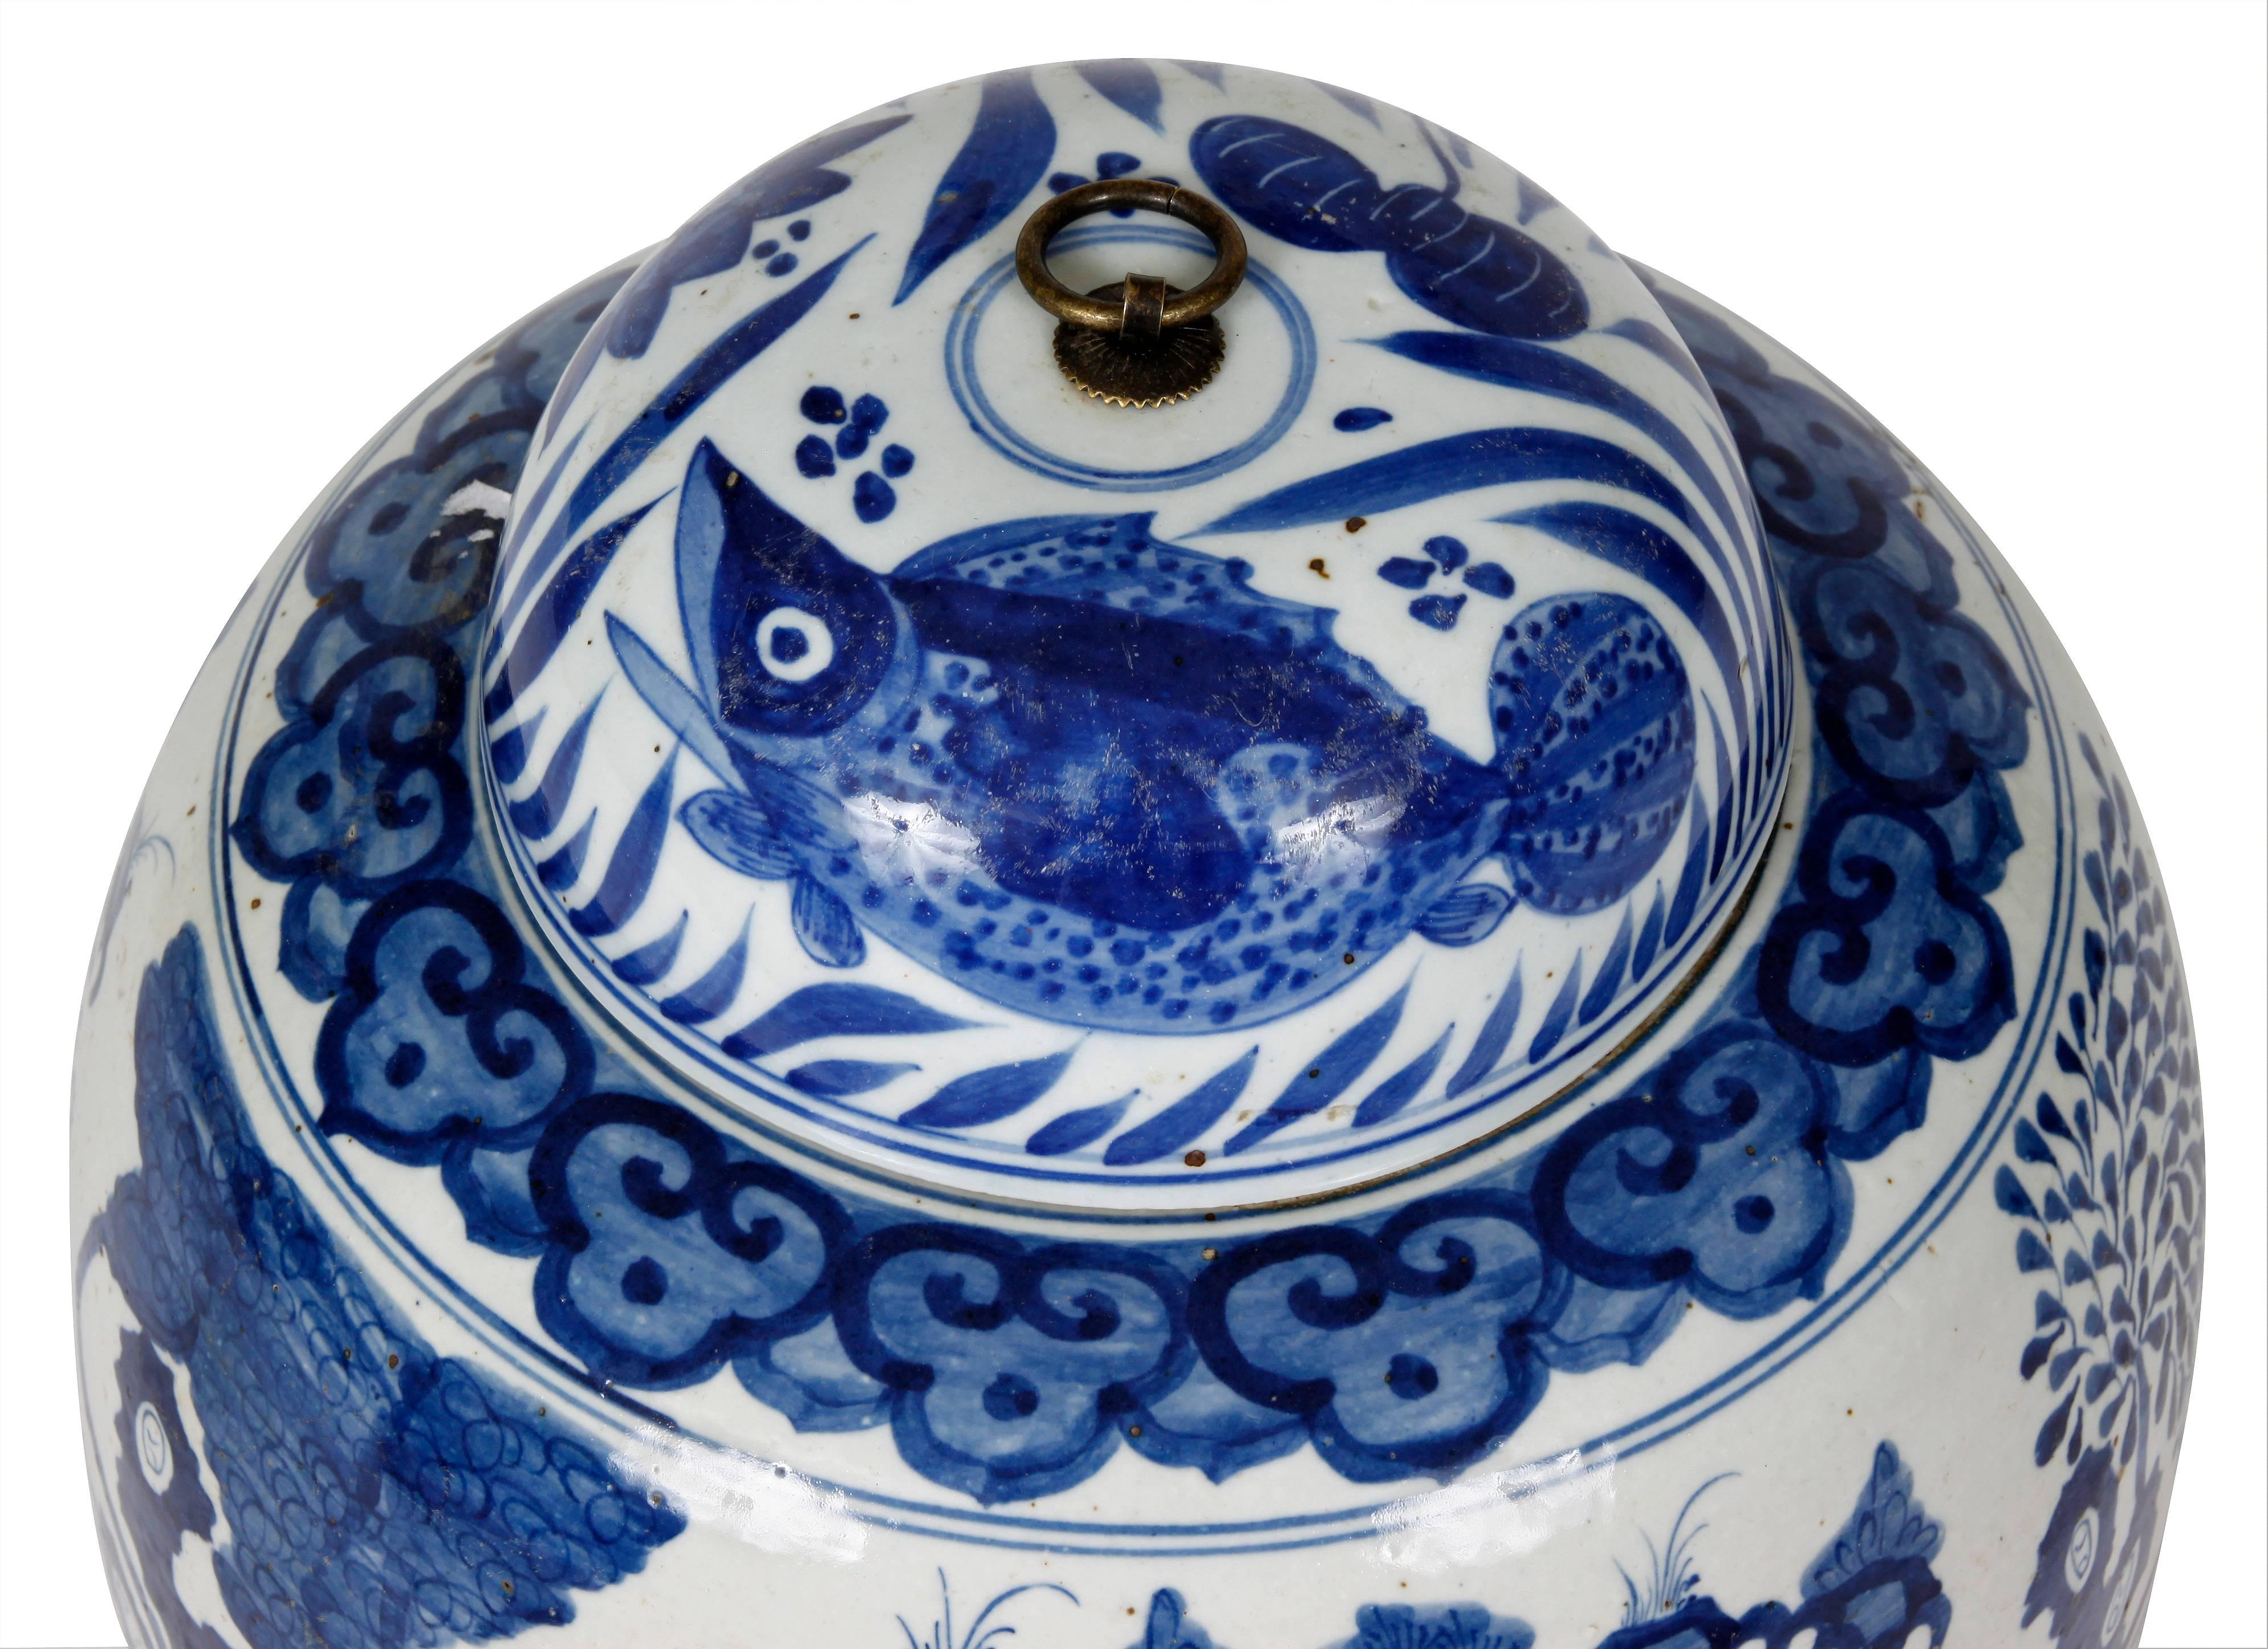 The beautiful deep blue color of this pair of ginger jars sets them apart from others. These beauties, depicting a wonderfully detailed scene, can flank a fireplace, accessorize a console table, or serve as vases. Blue and white will never go out of